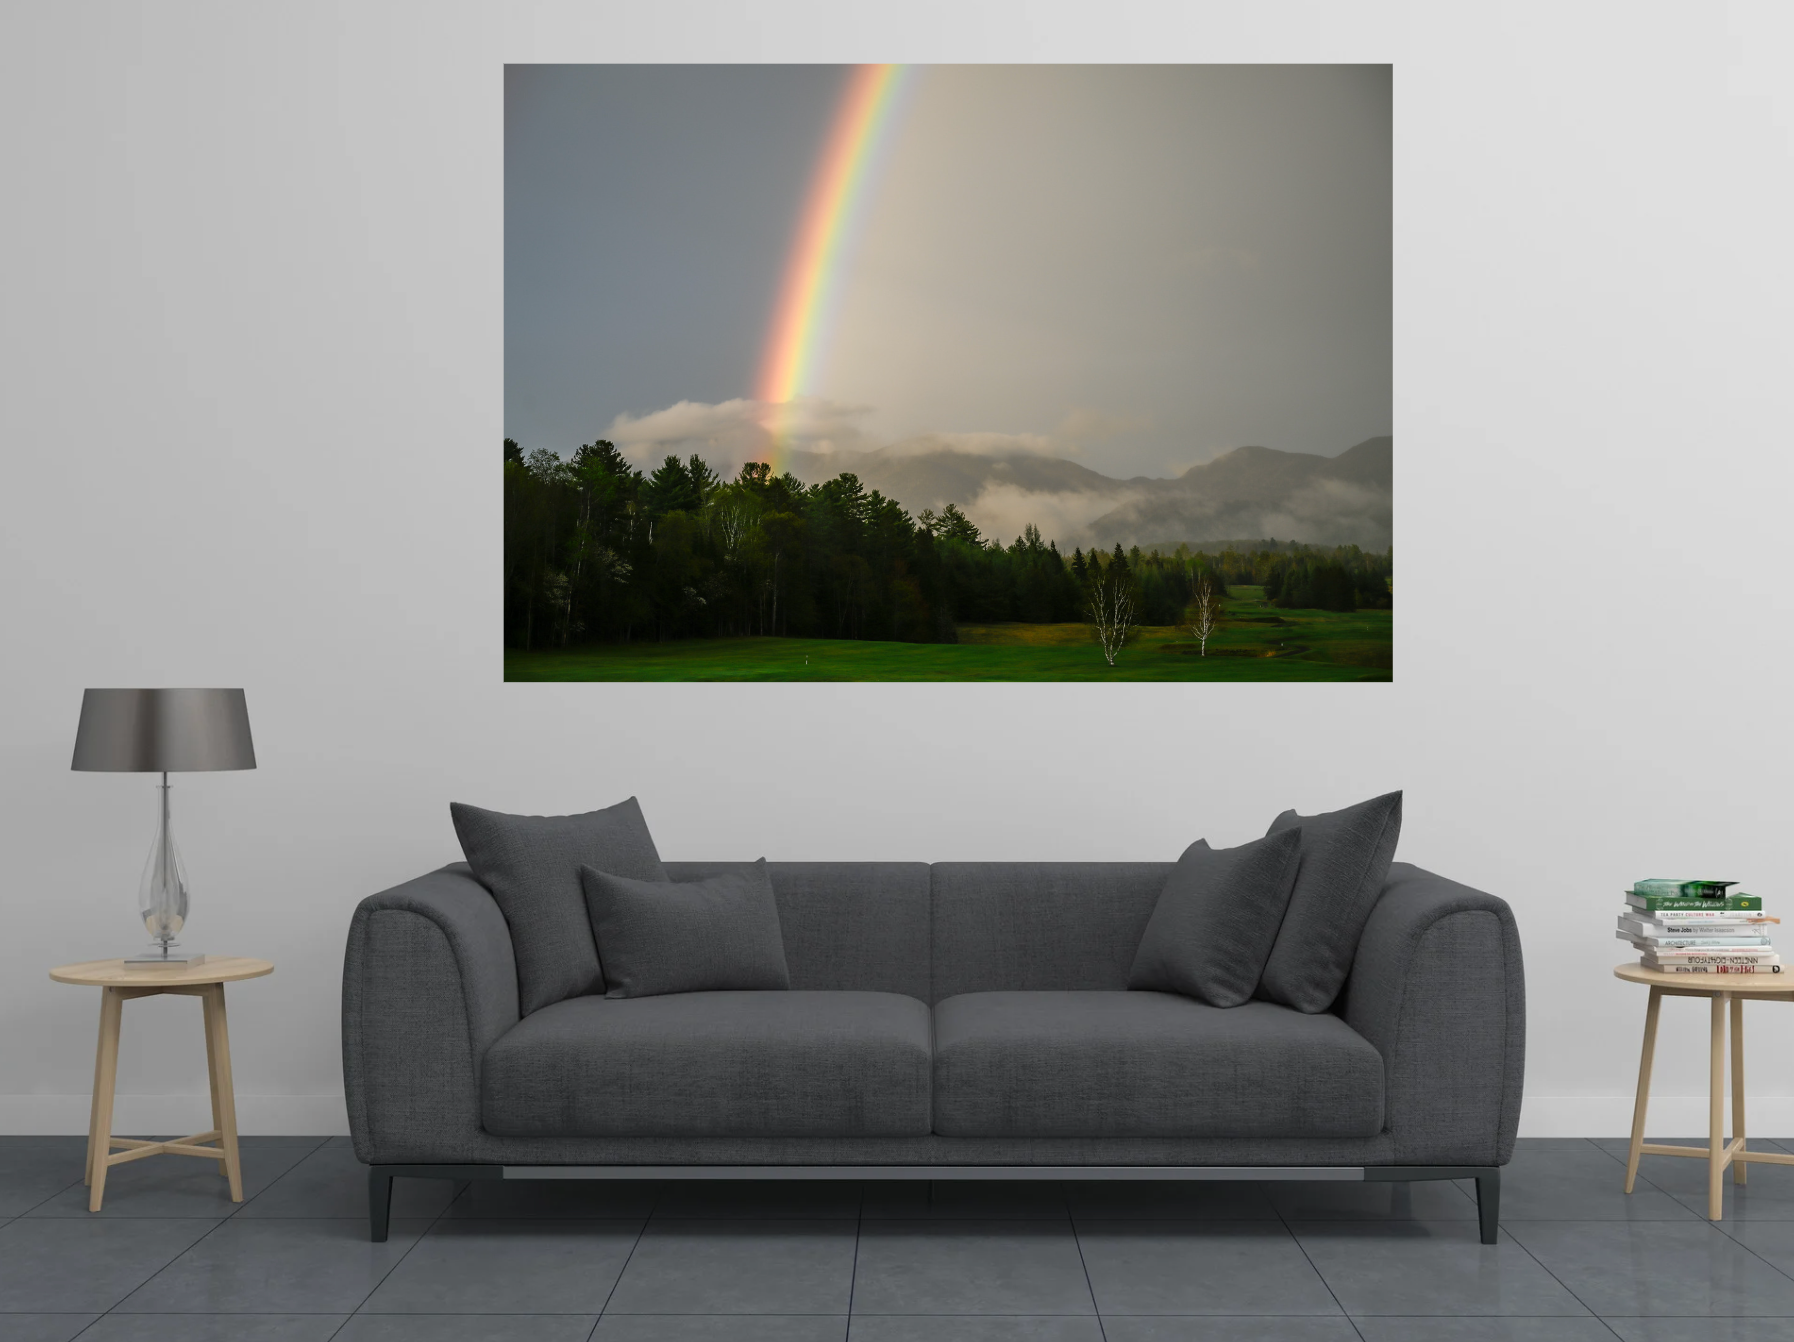 print of a rainbow in the adirondack mountains